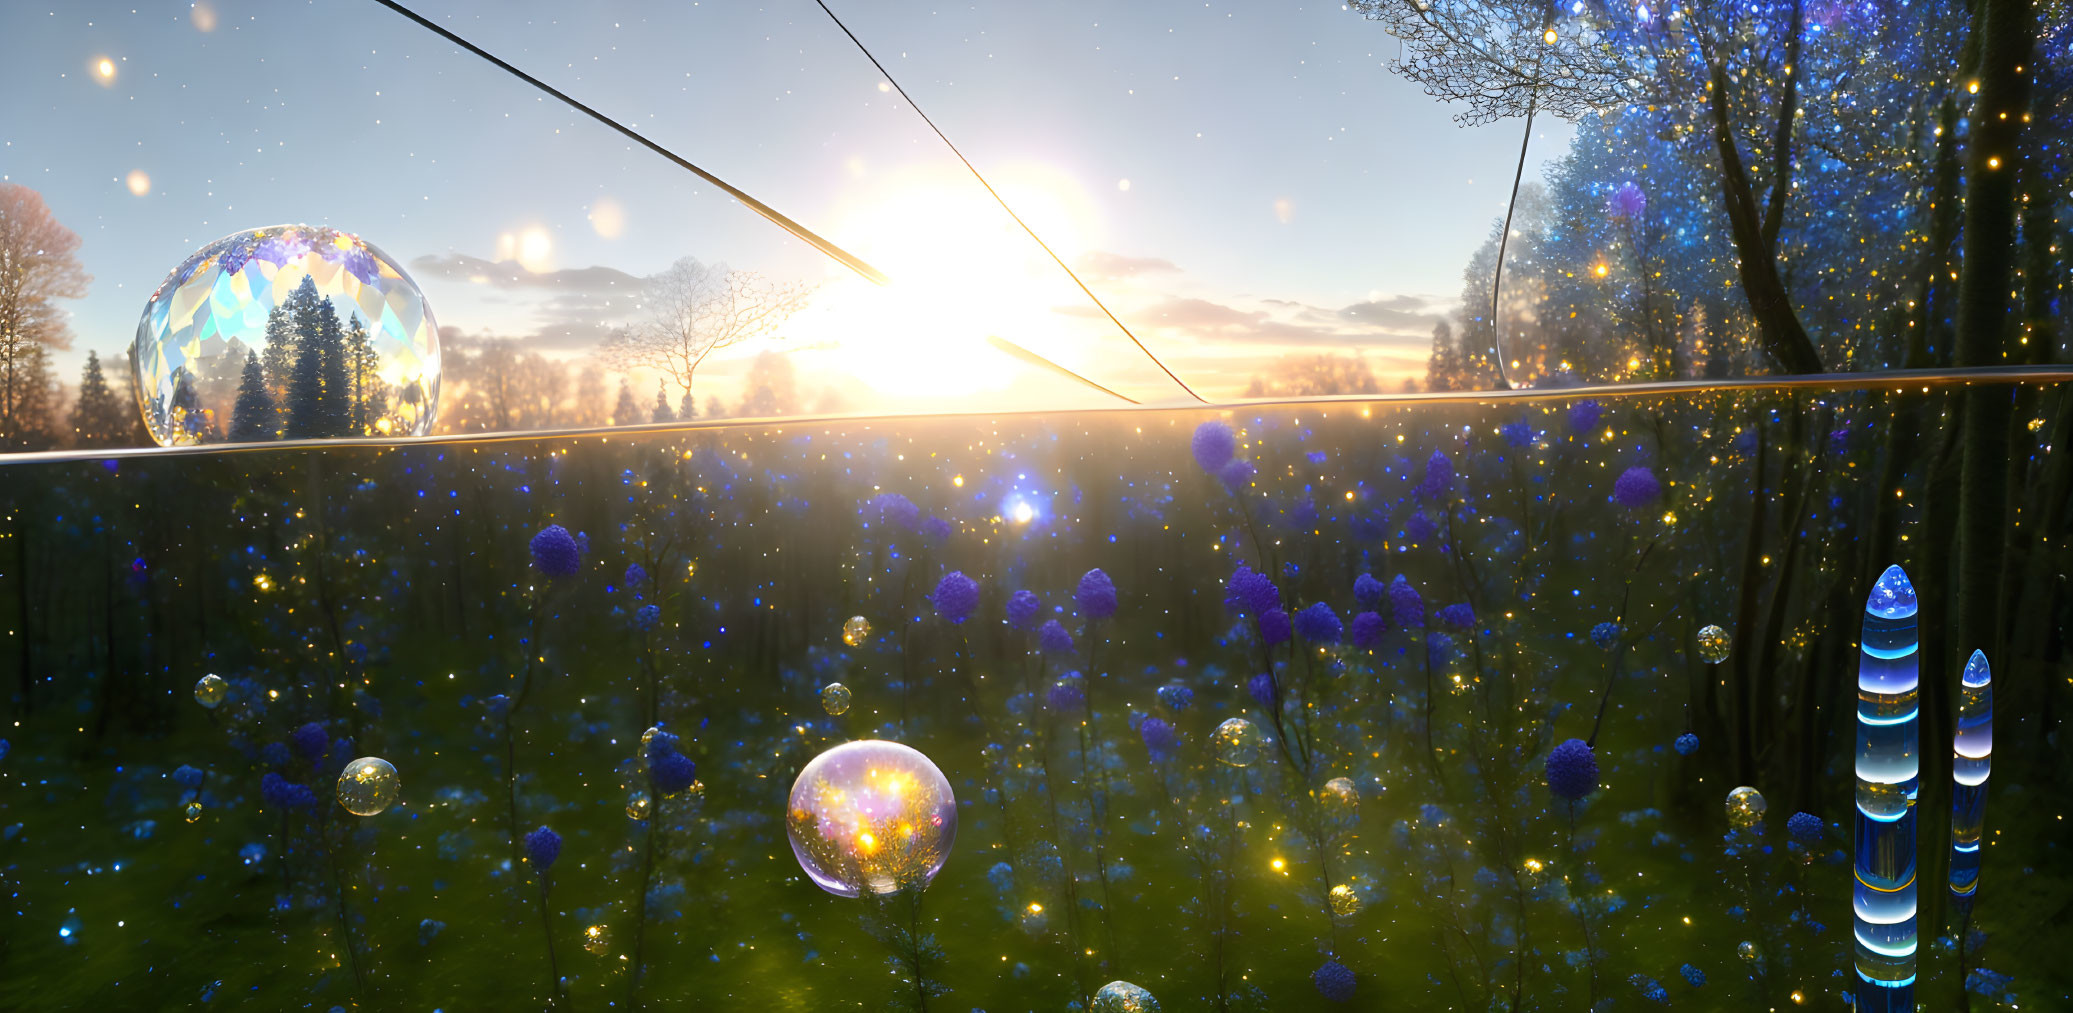 Fantastical sunset landscape with glowing orbs and magical structures among trees